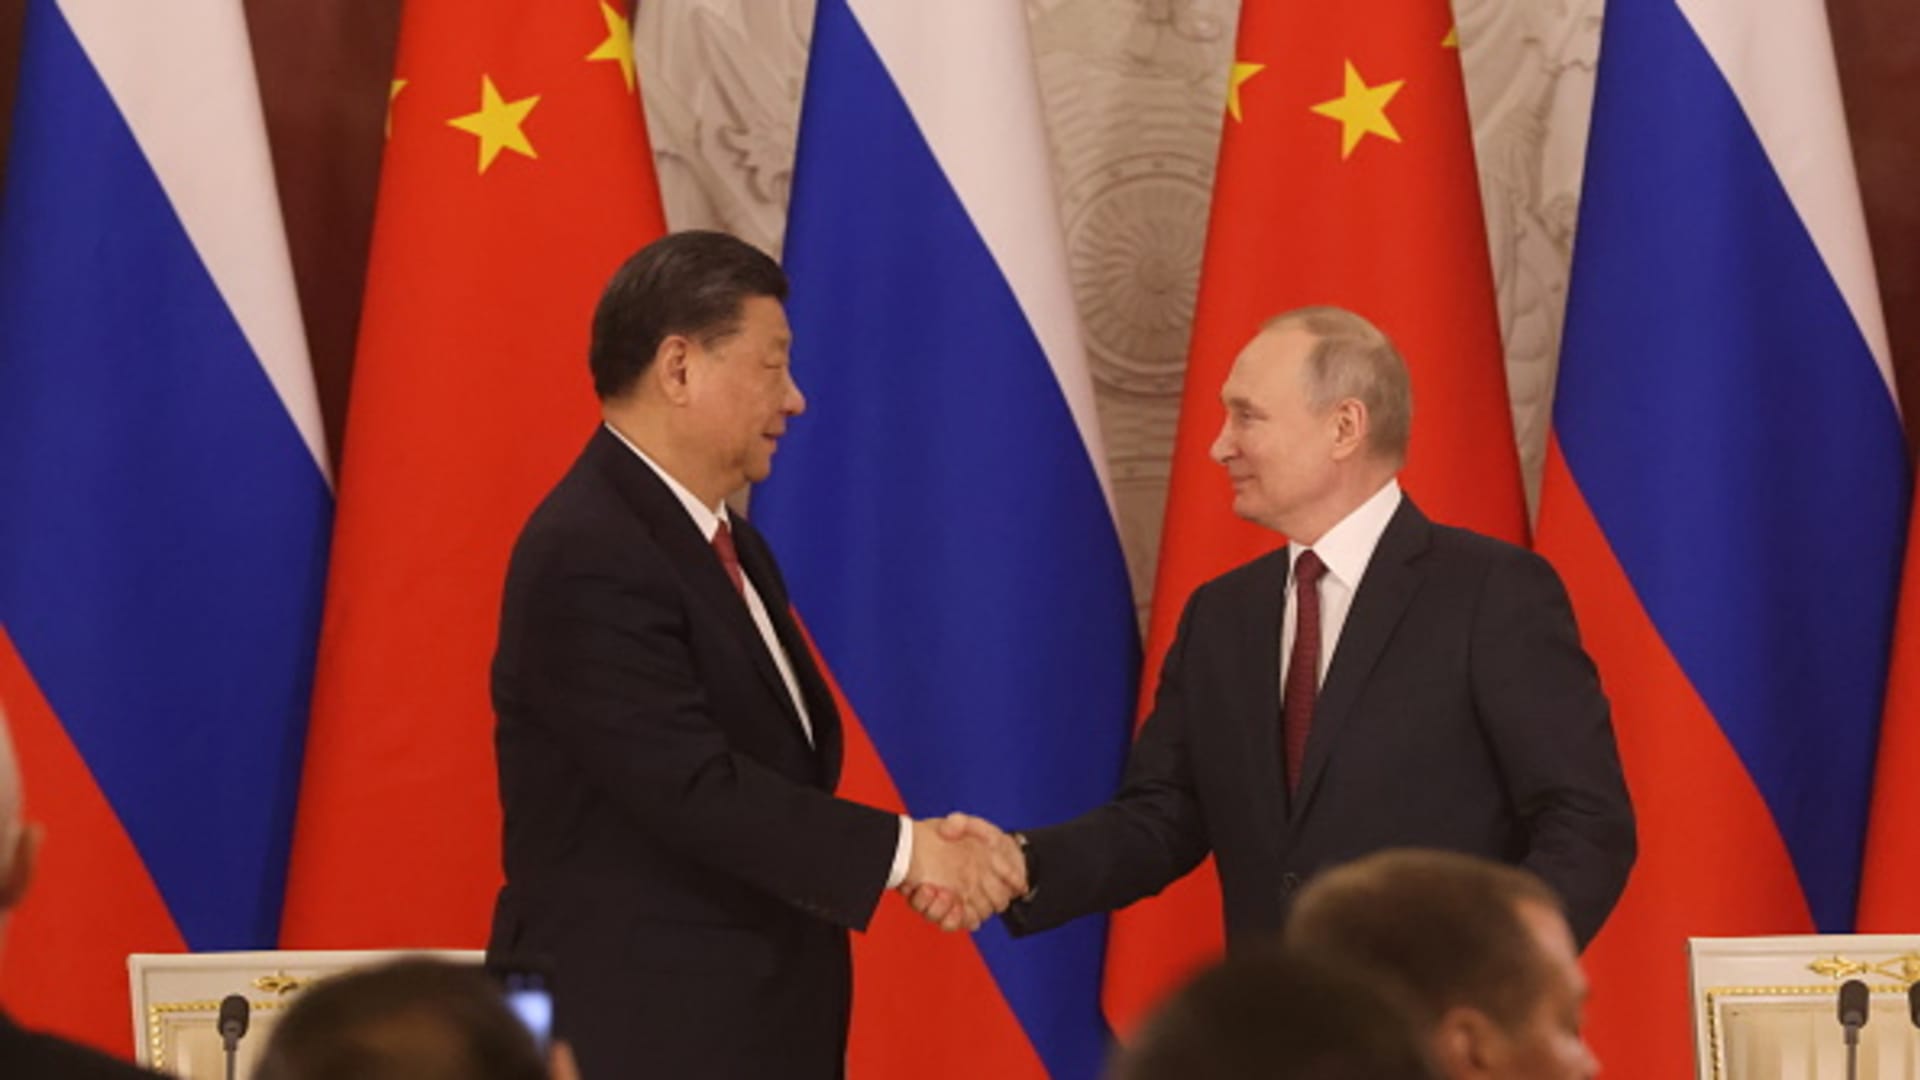 Chinese President Xi Jinping and Russian President Vladimir Putin at the Grand Kremlin Palace on March 21, 2023, in Moscow.